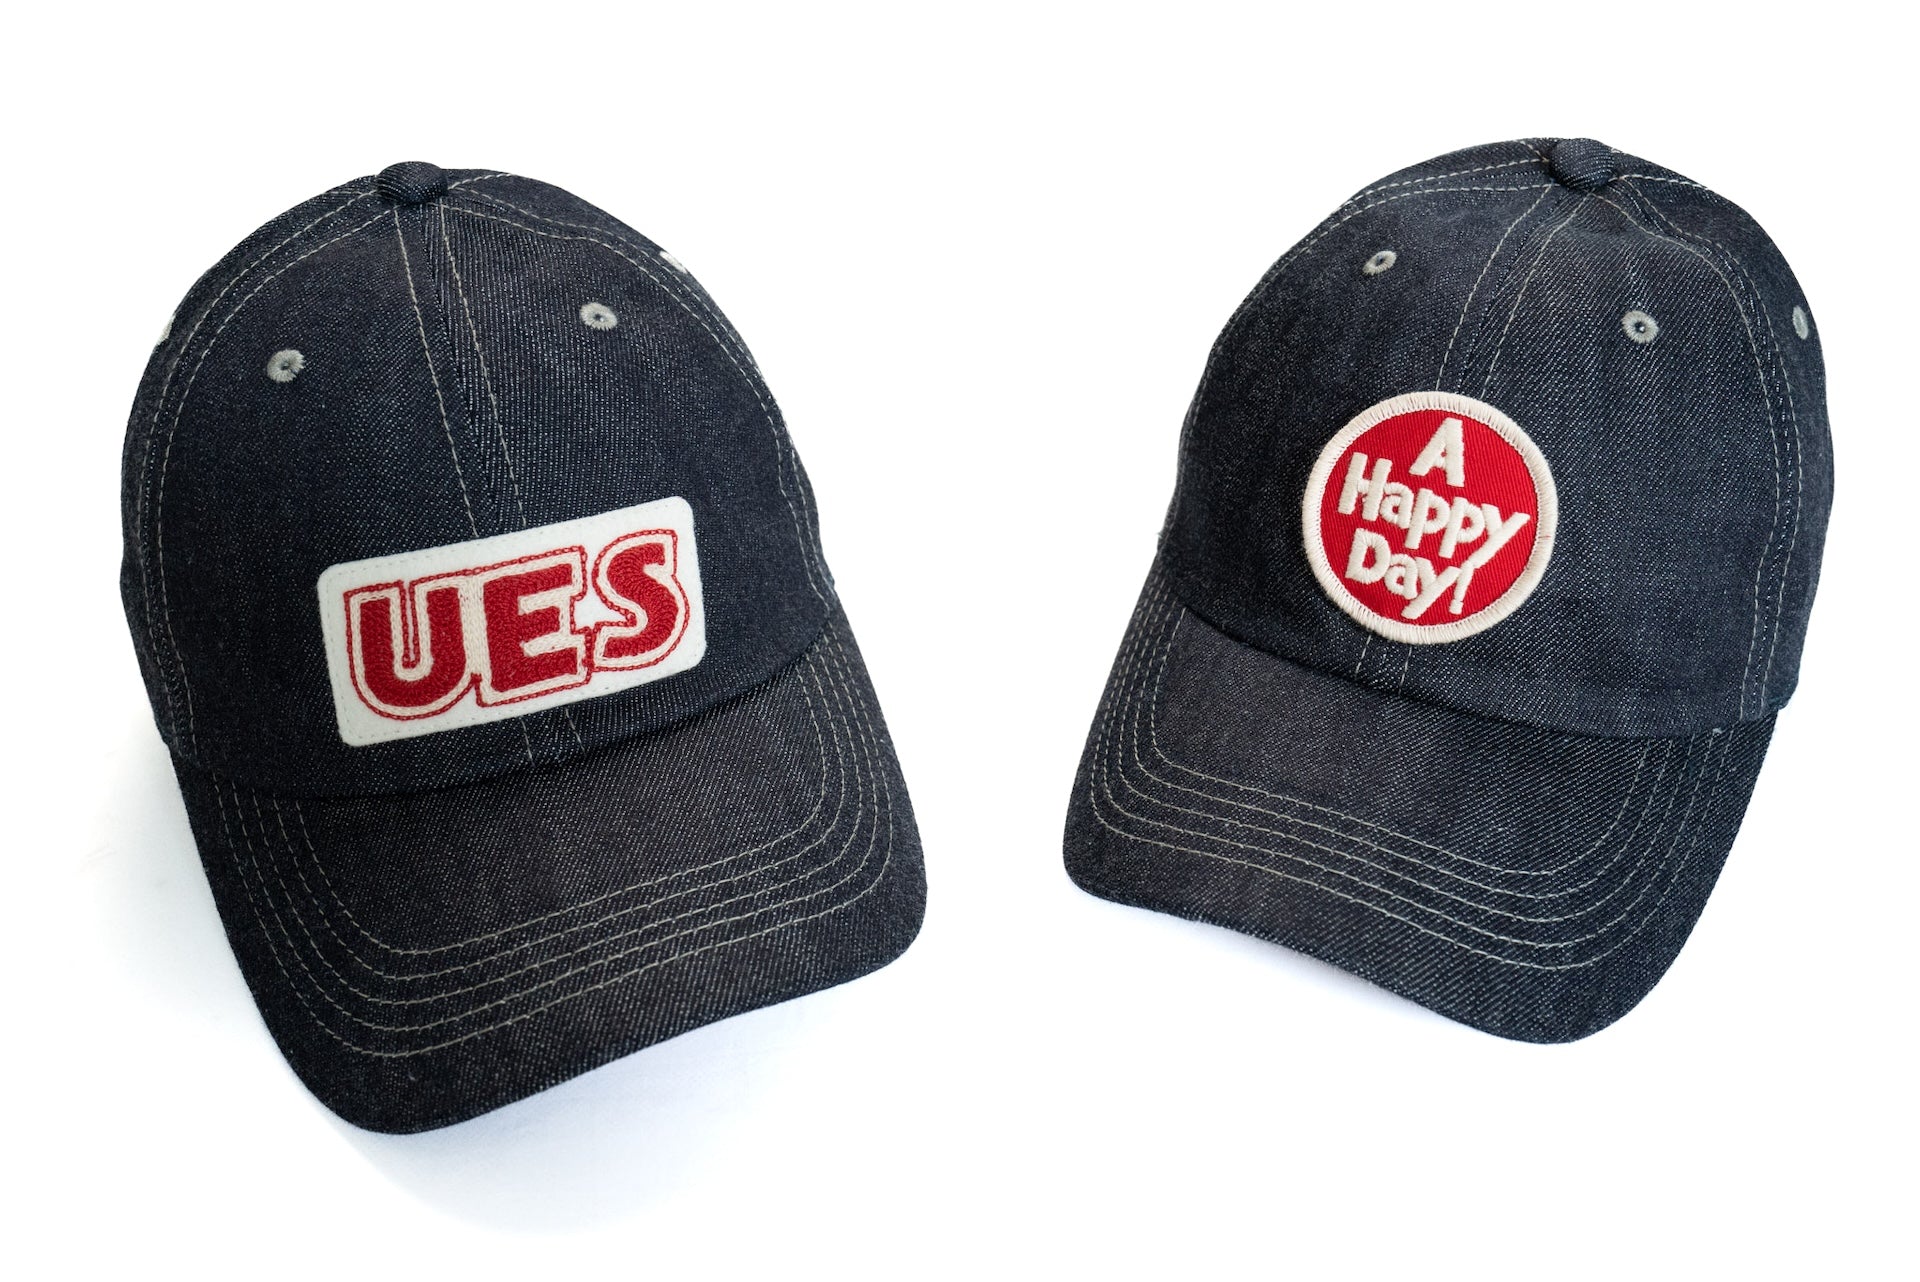 UES "A Happy Day" Denim Baseball Cap (55th Anniversary Limited Edition)